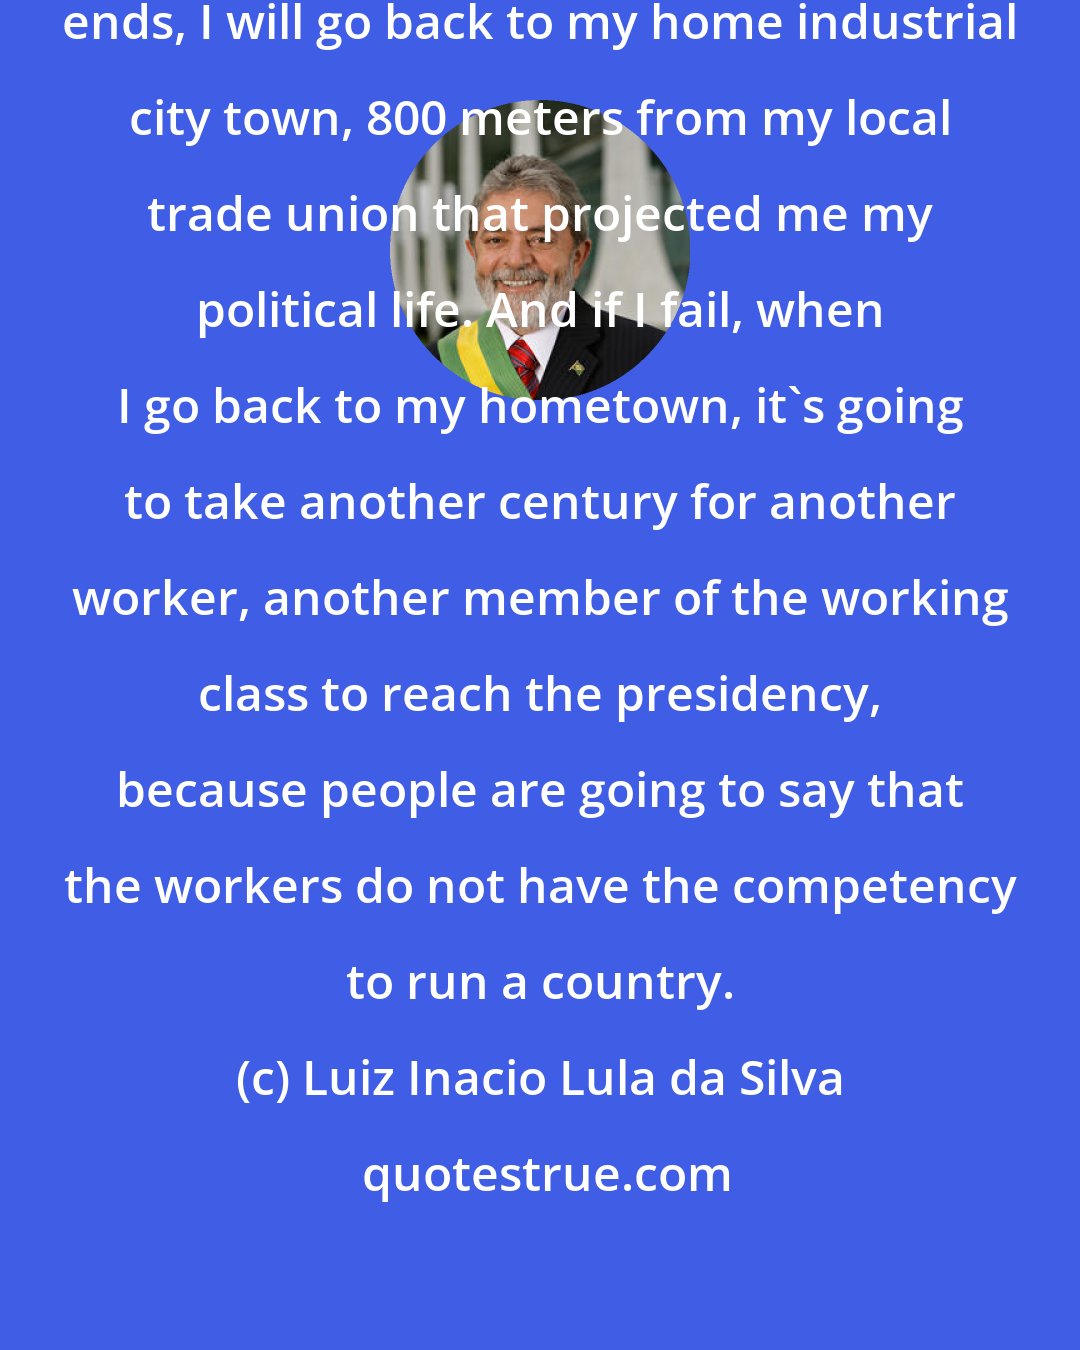 Luiz Inacio Lula da Silva: Only in my case, when my presidency ends, I will go back to my home industrial city town, 800 meters from my local trade union that projected me my political life. And if I fail, when I go back to my hometown, it's going to take another century for another worker, another member of the working class to reach the presidency, because people are going to say that the workers do not have the competency to run a country.